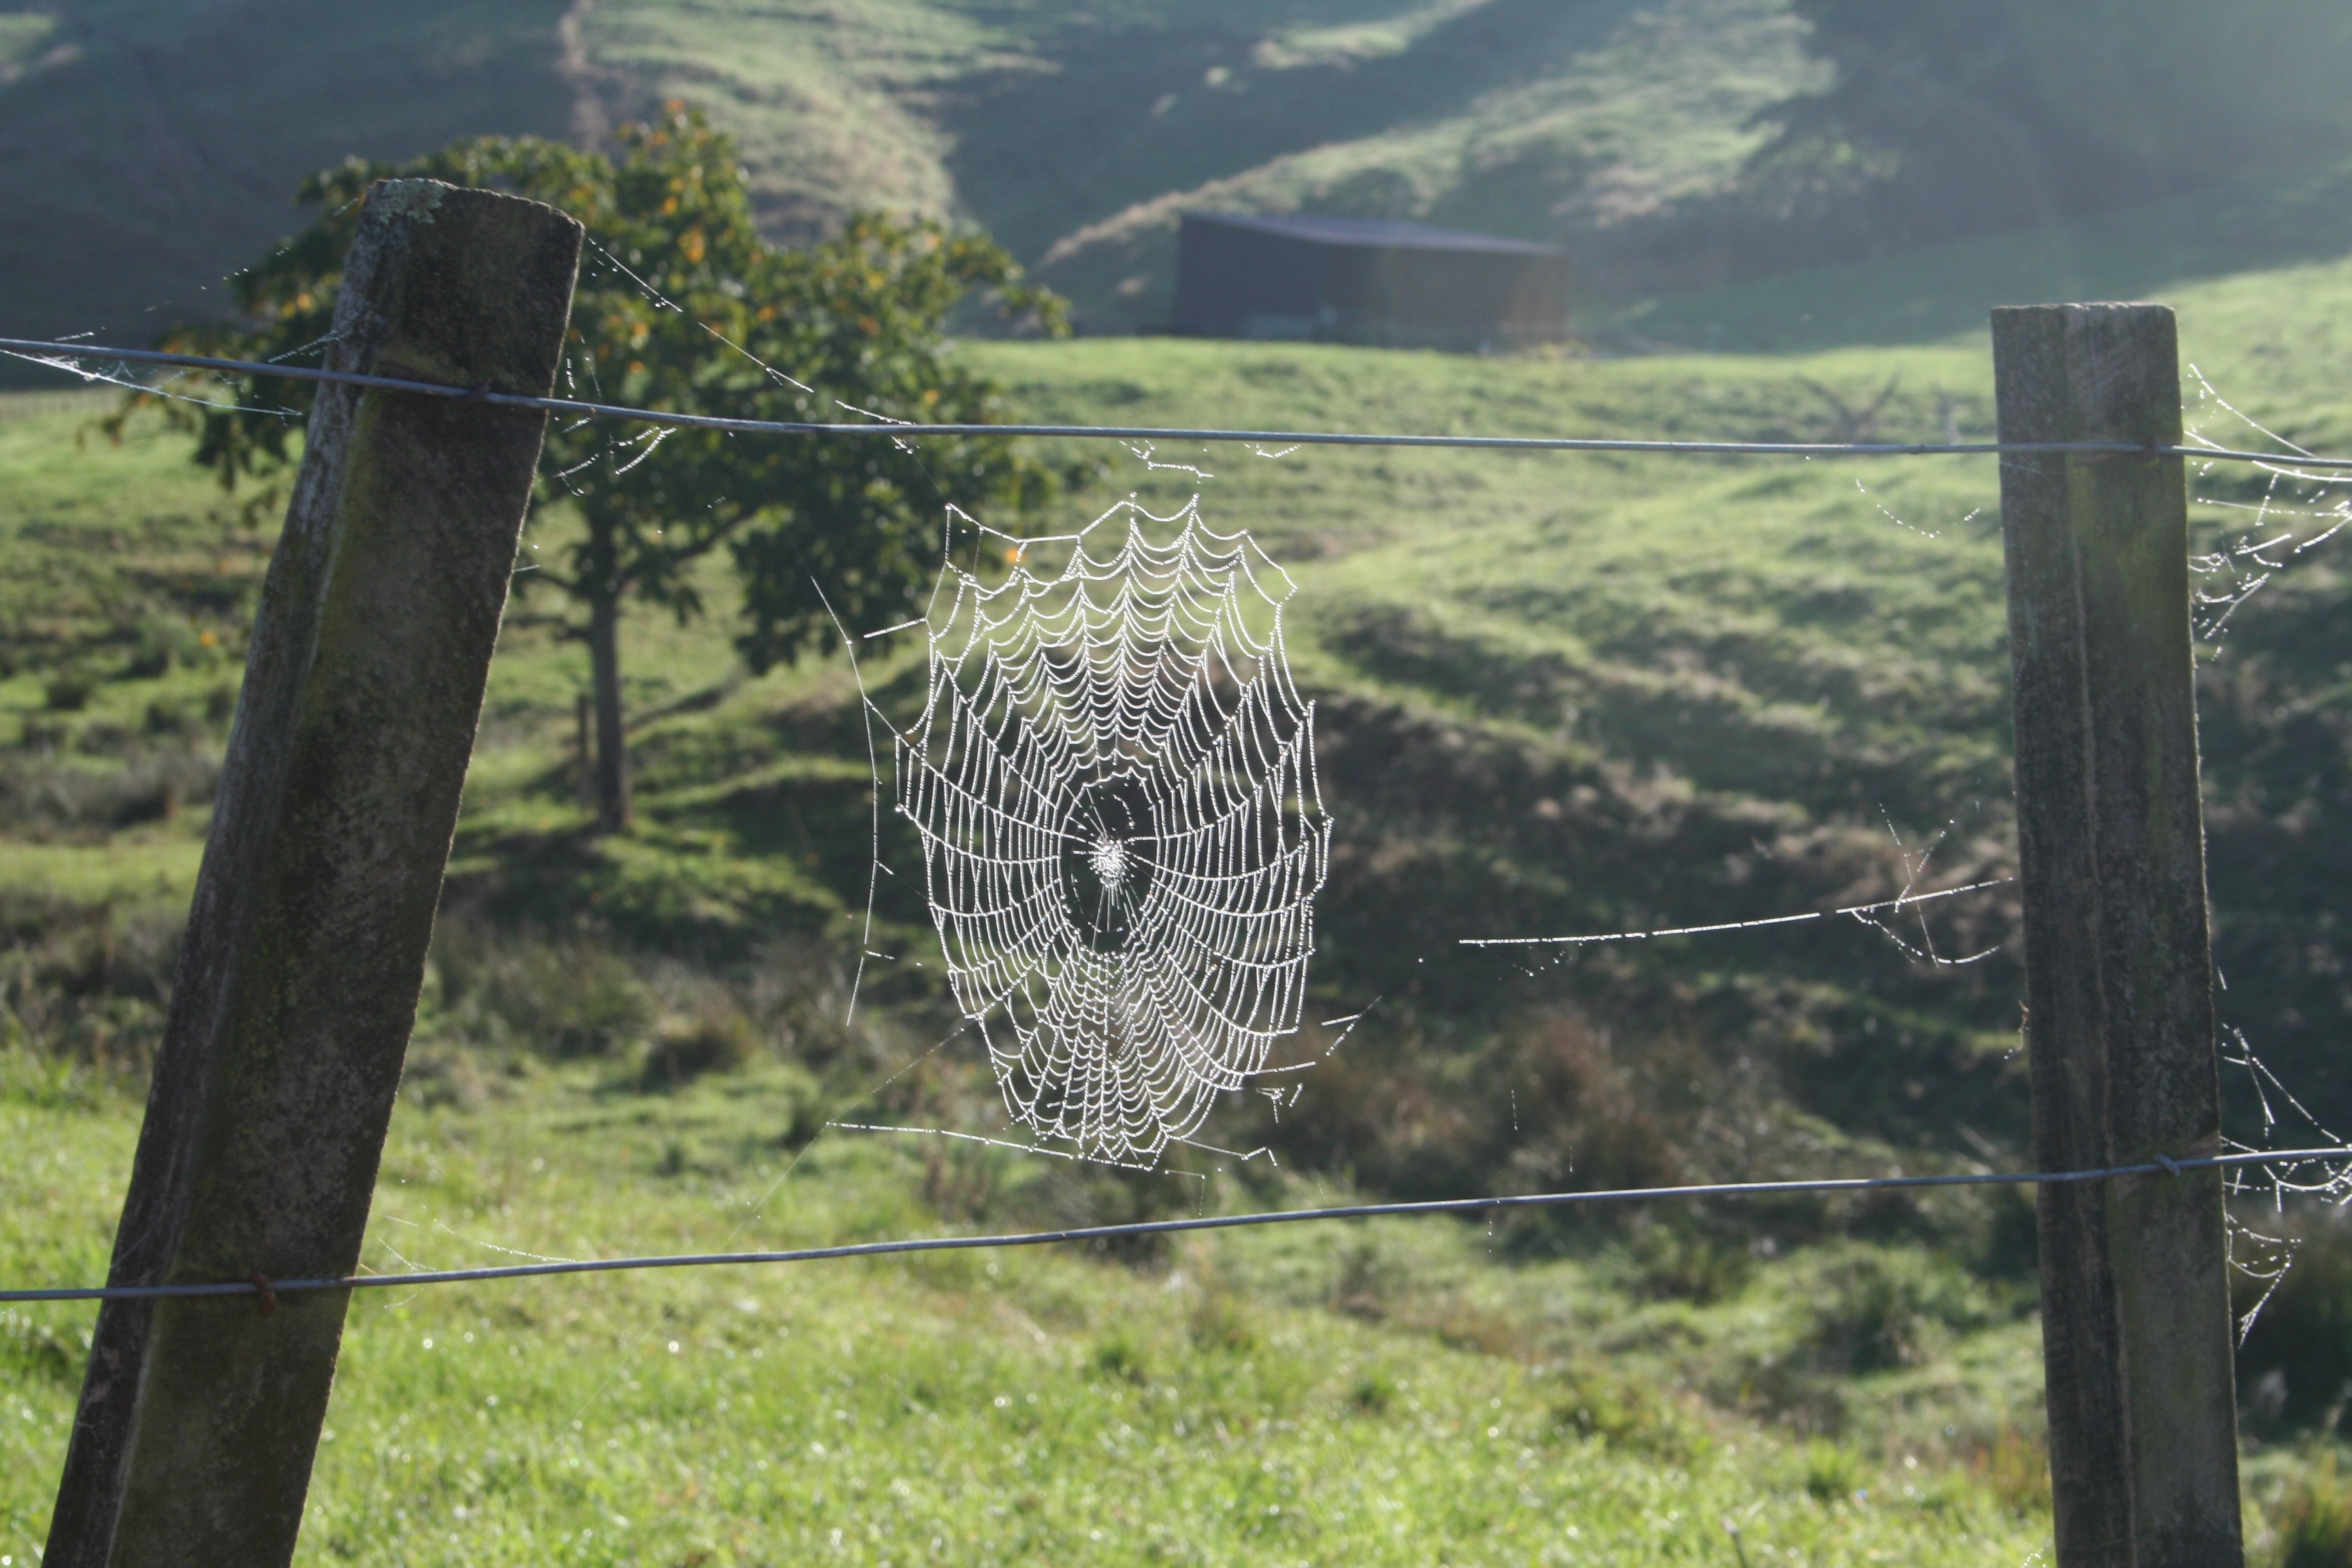 Spiderweb attached to a fence.